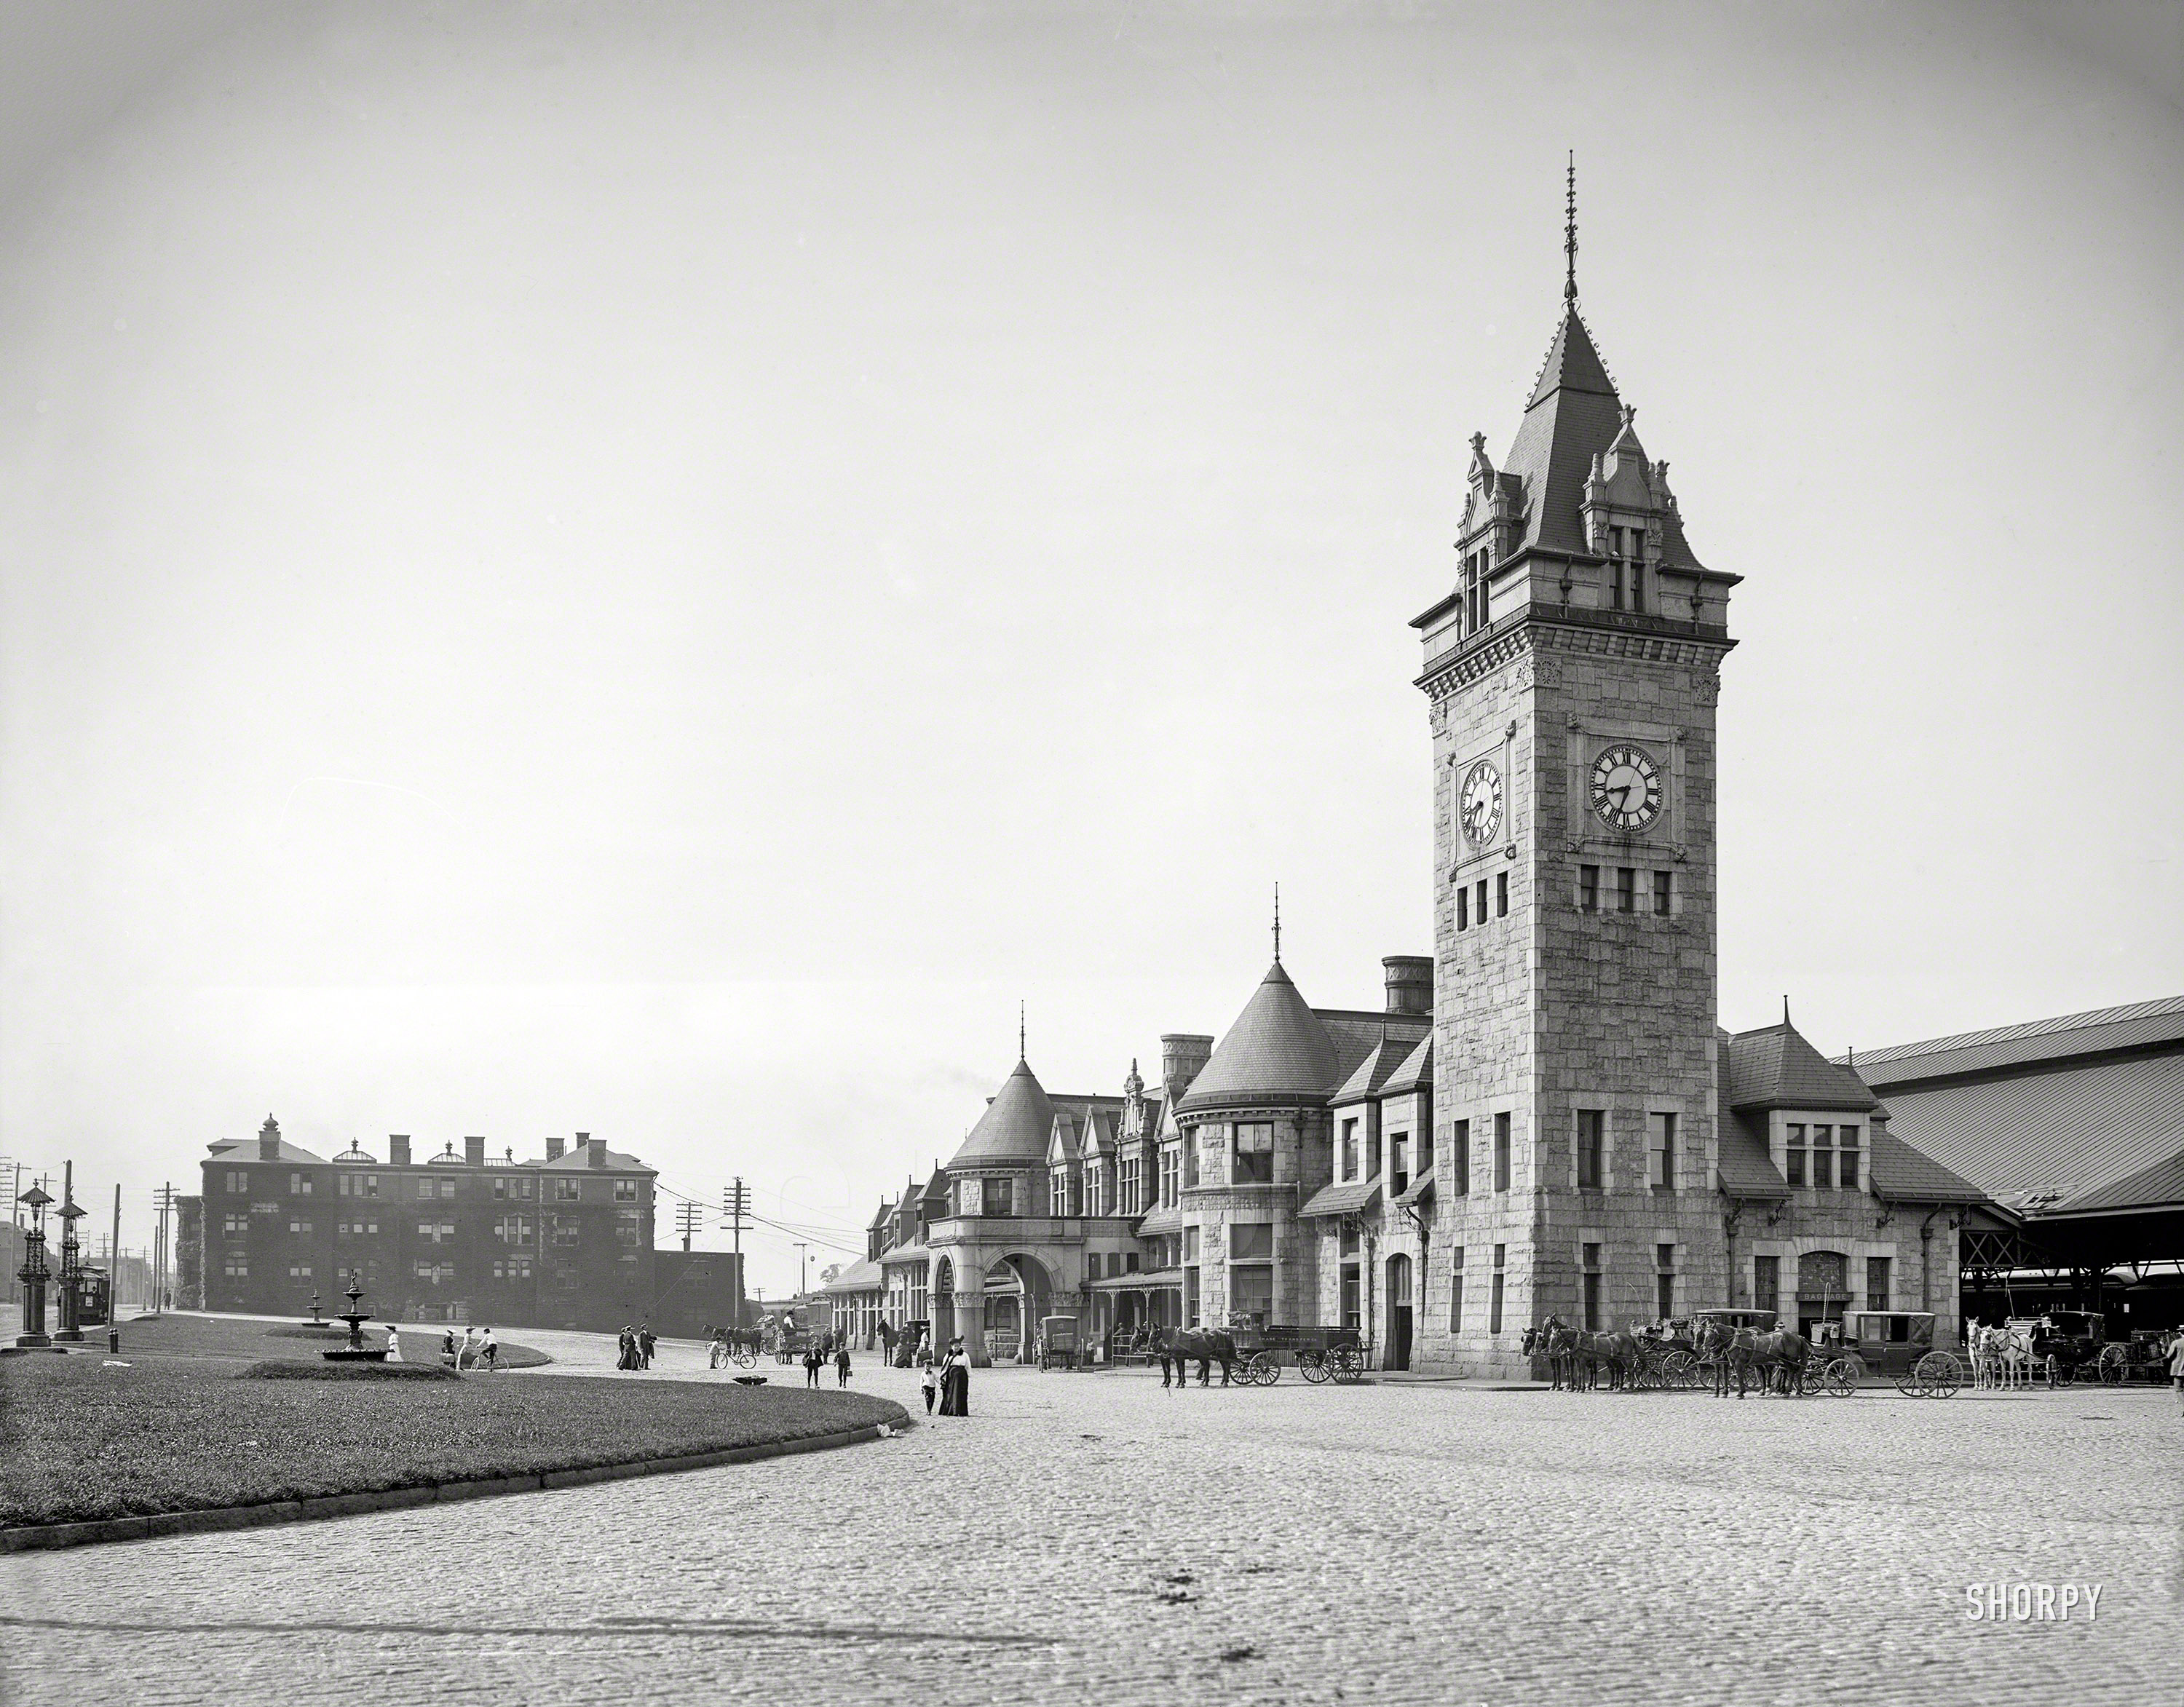 1909. "Union Station, Portland, Maine." Demolished August 31, 1961. 8x10 inch dry plate glass negative, Detroit Publishing Company. View full size.